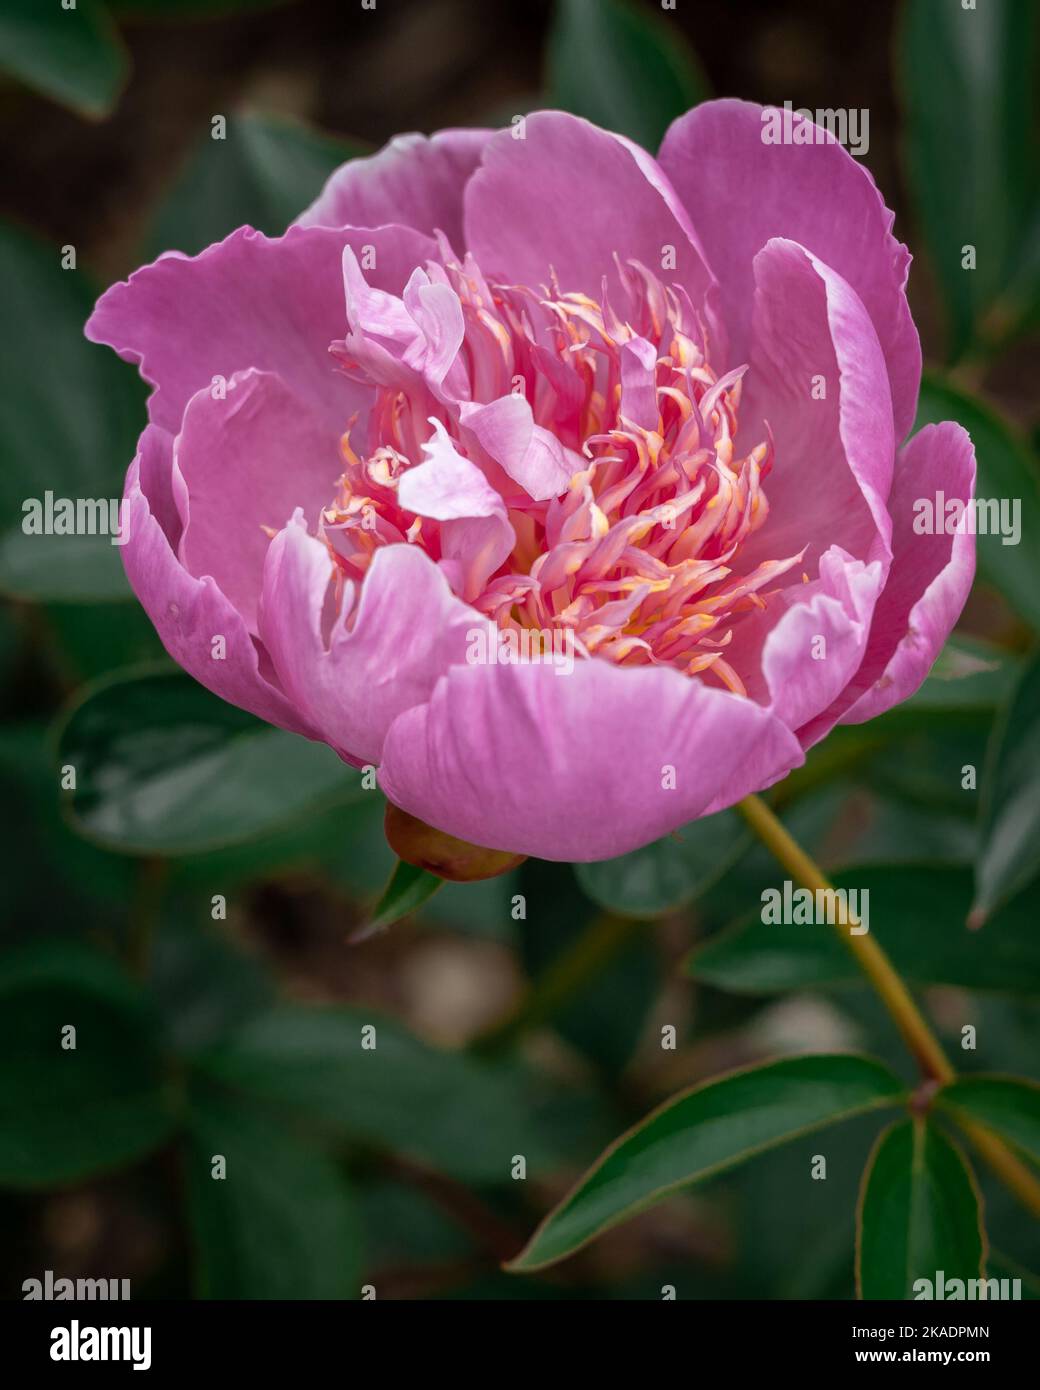 Pink peony (Paeonia sp) flower on green background. Stock Photo